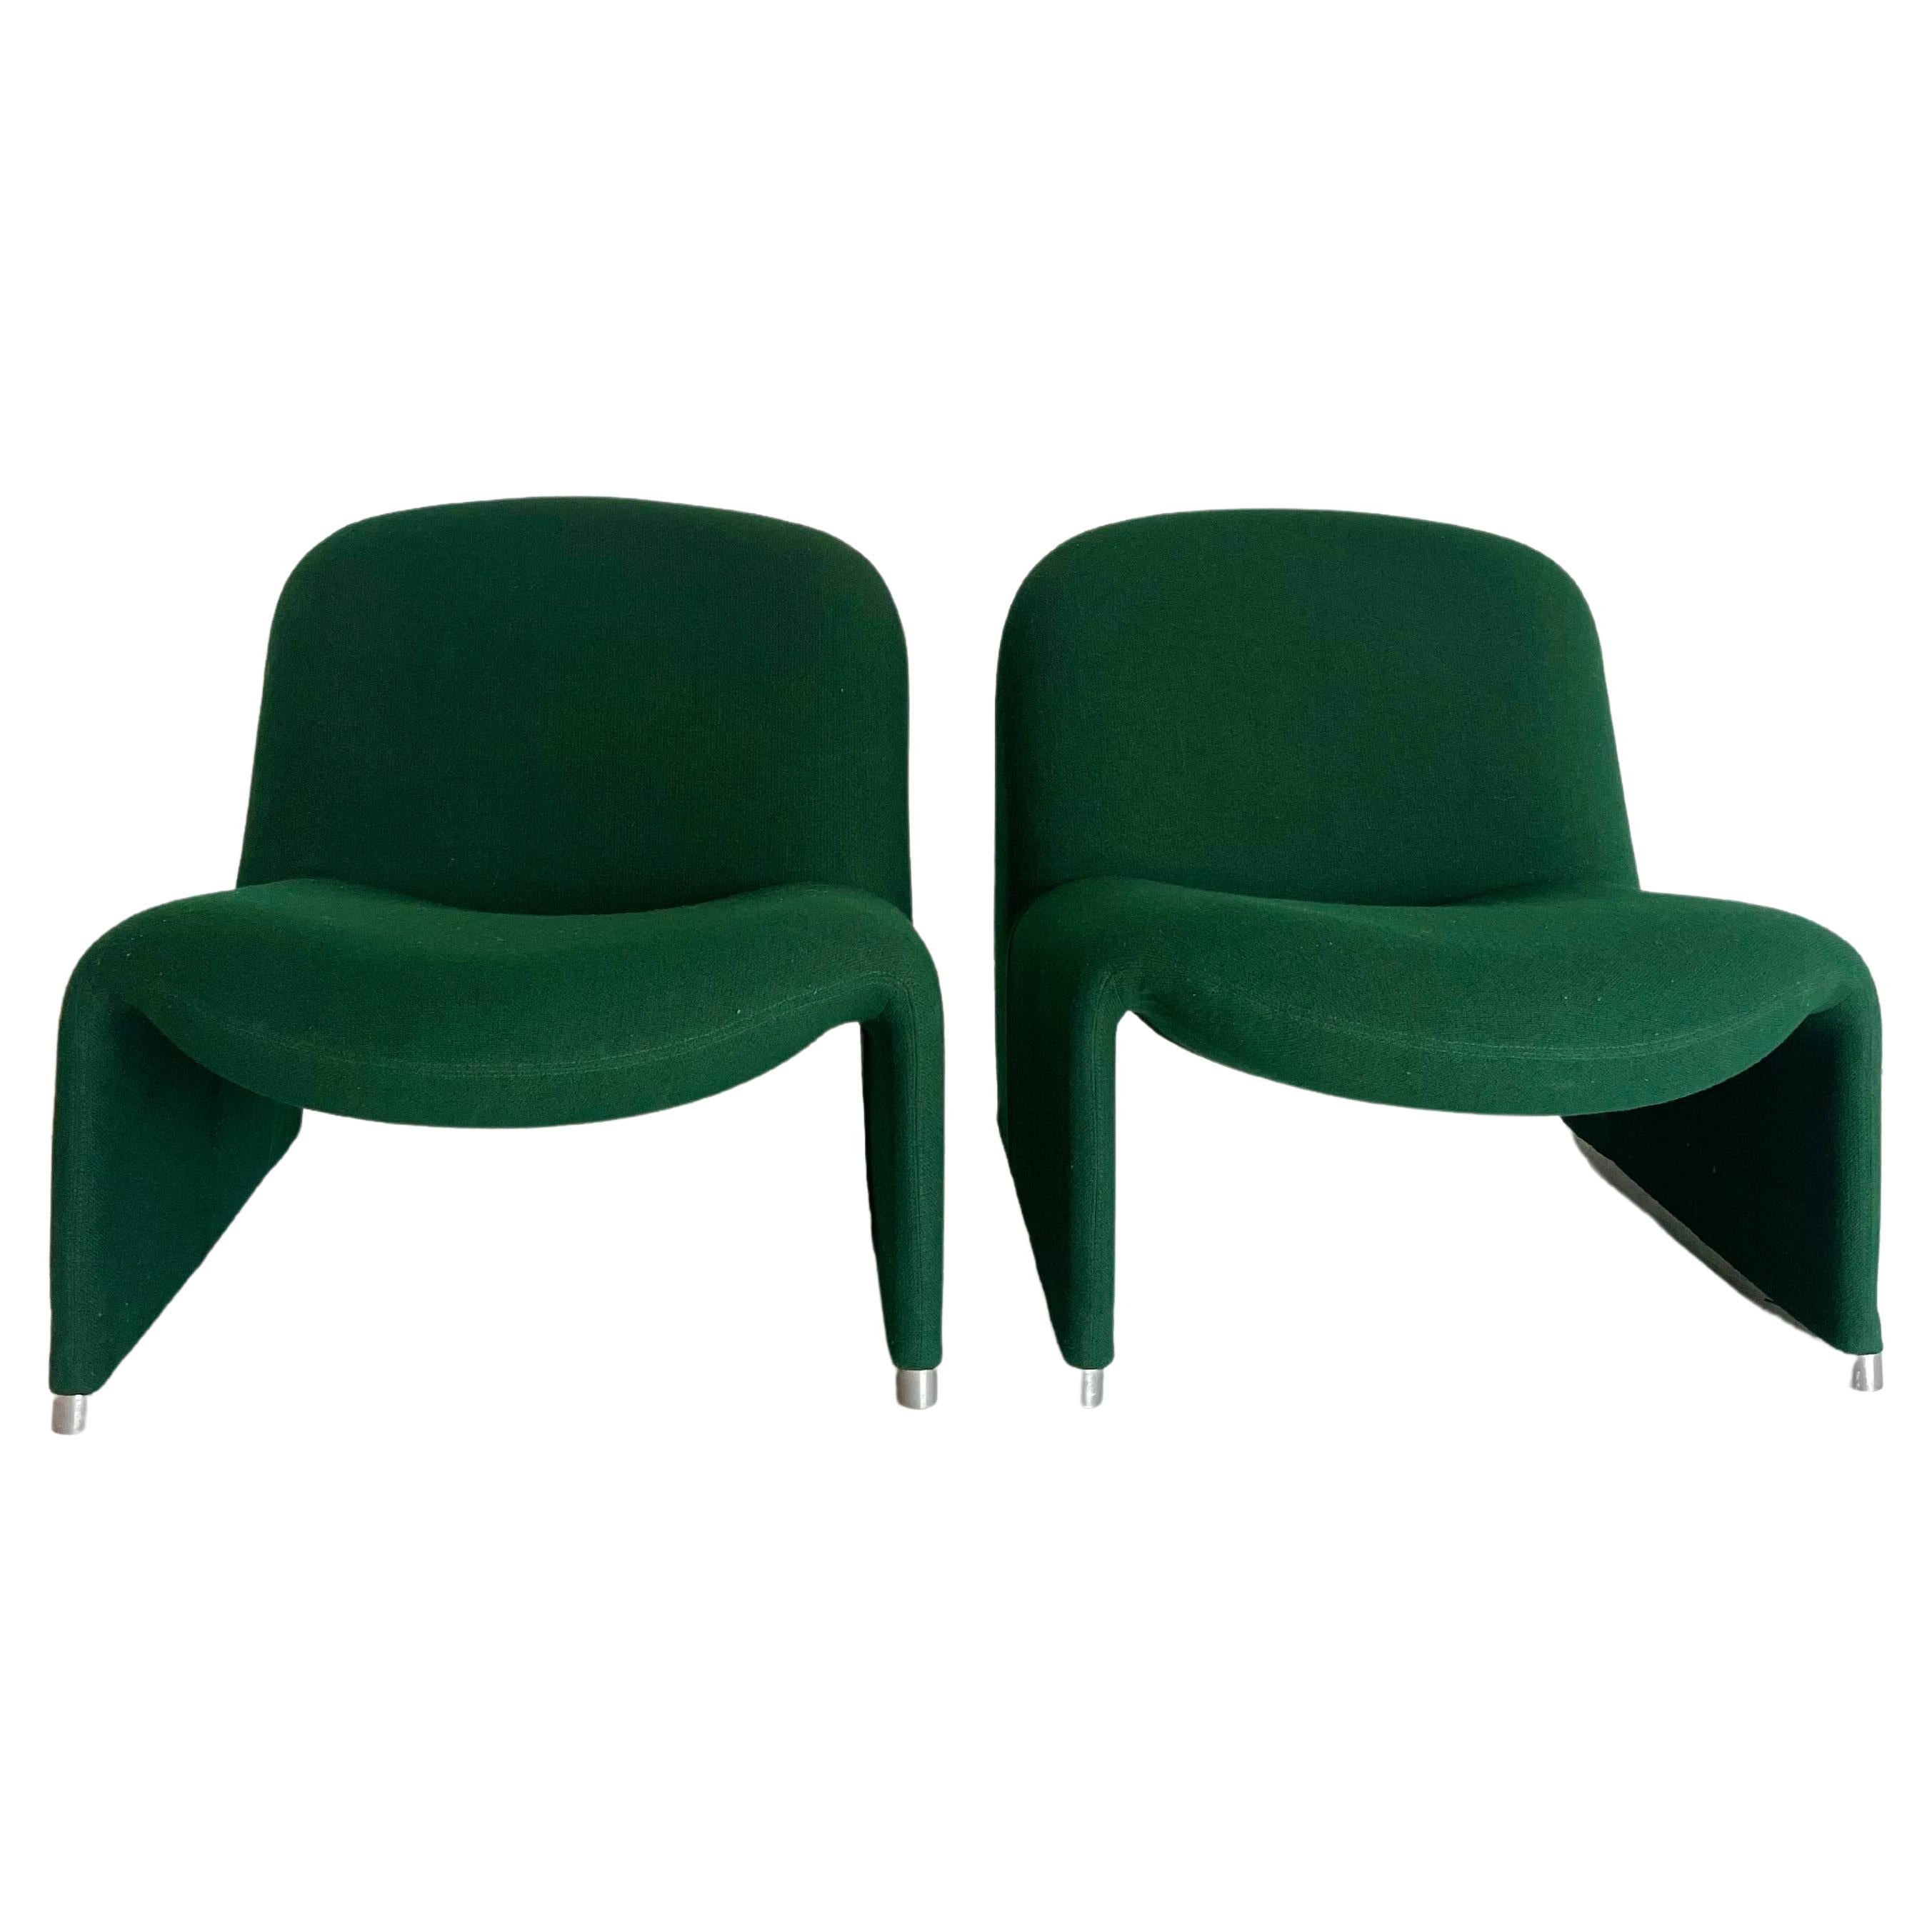 Pair of Alky Chairs by Giancarlo Piretti for Anonima Castelli, 1970